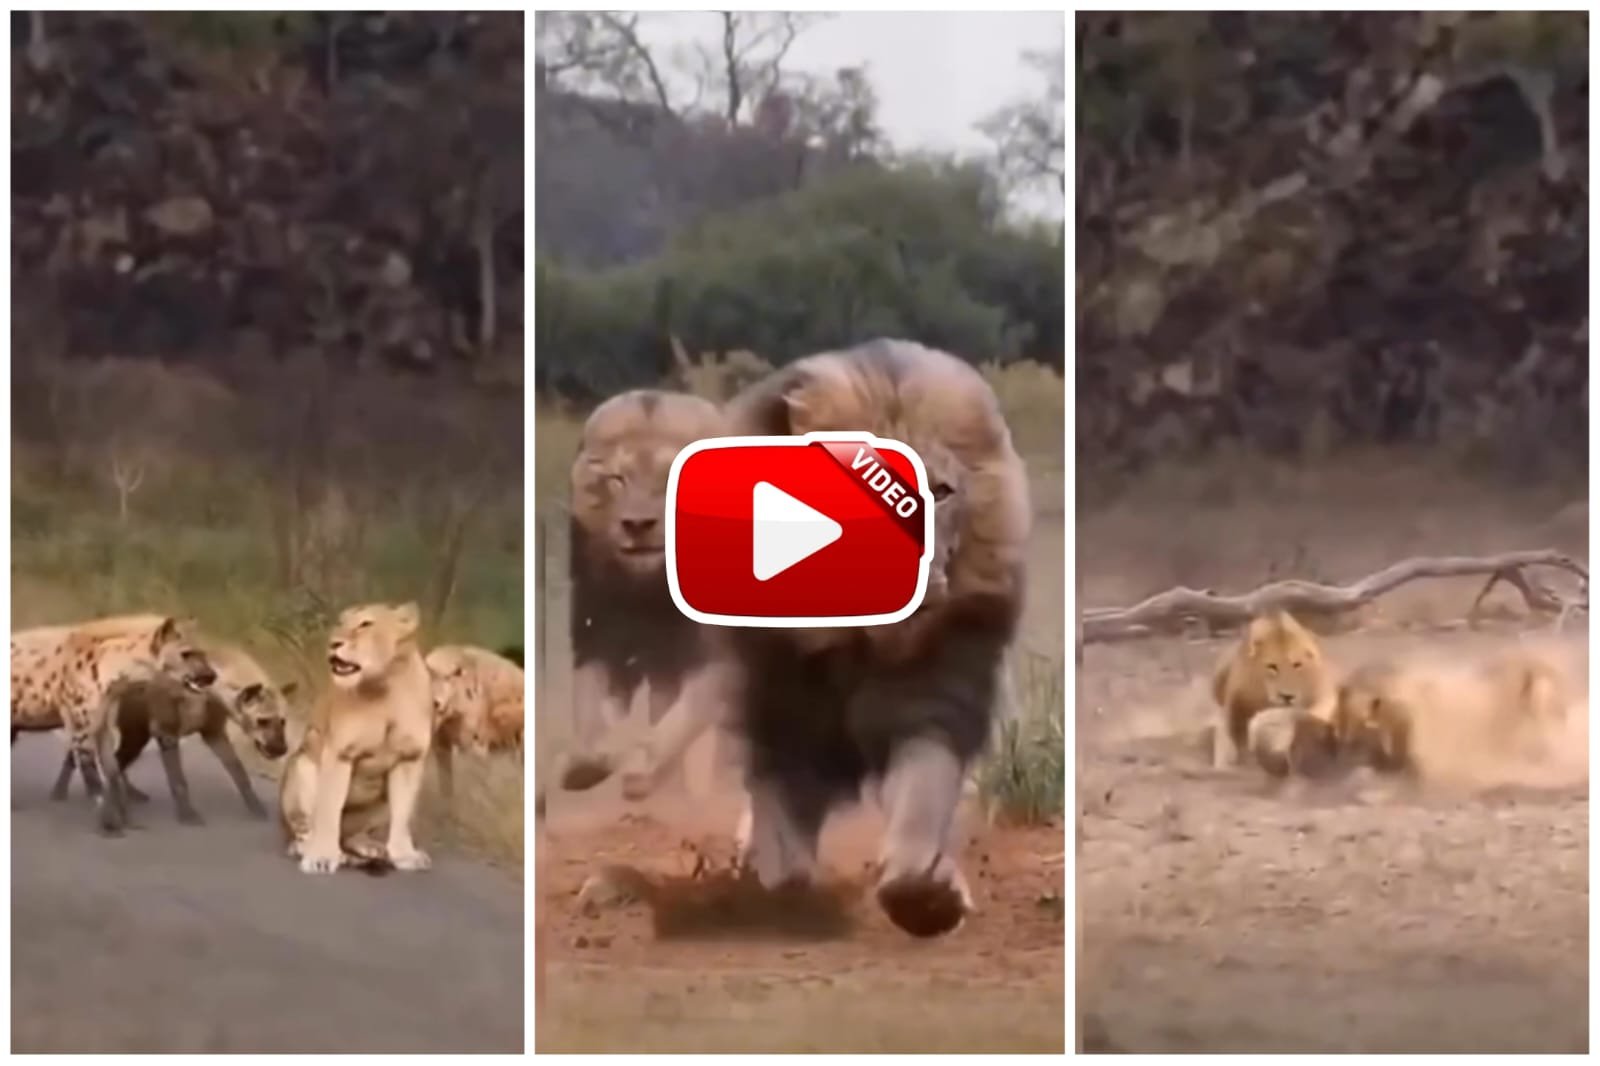 Sher Ka Video - The hyenas were dominating the lioness, then the lion came and threatened them.